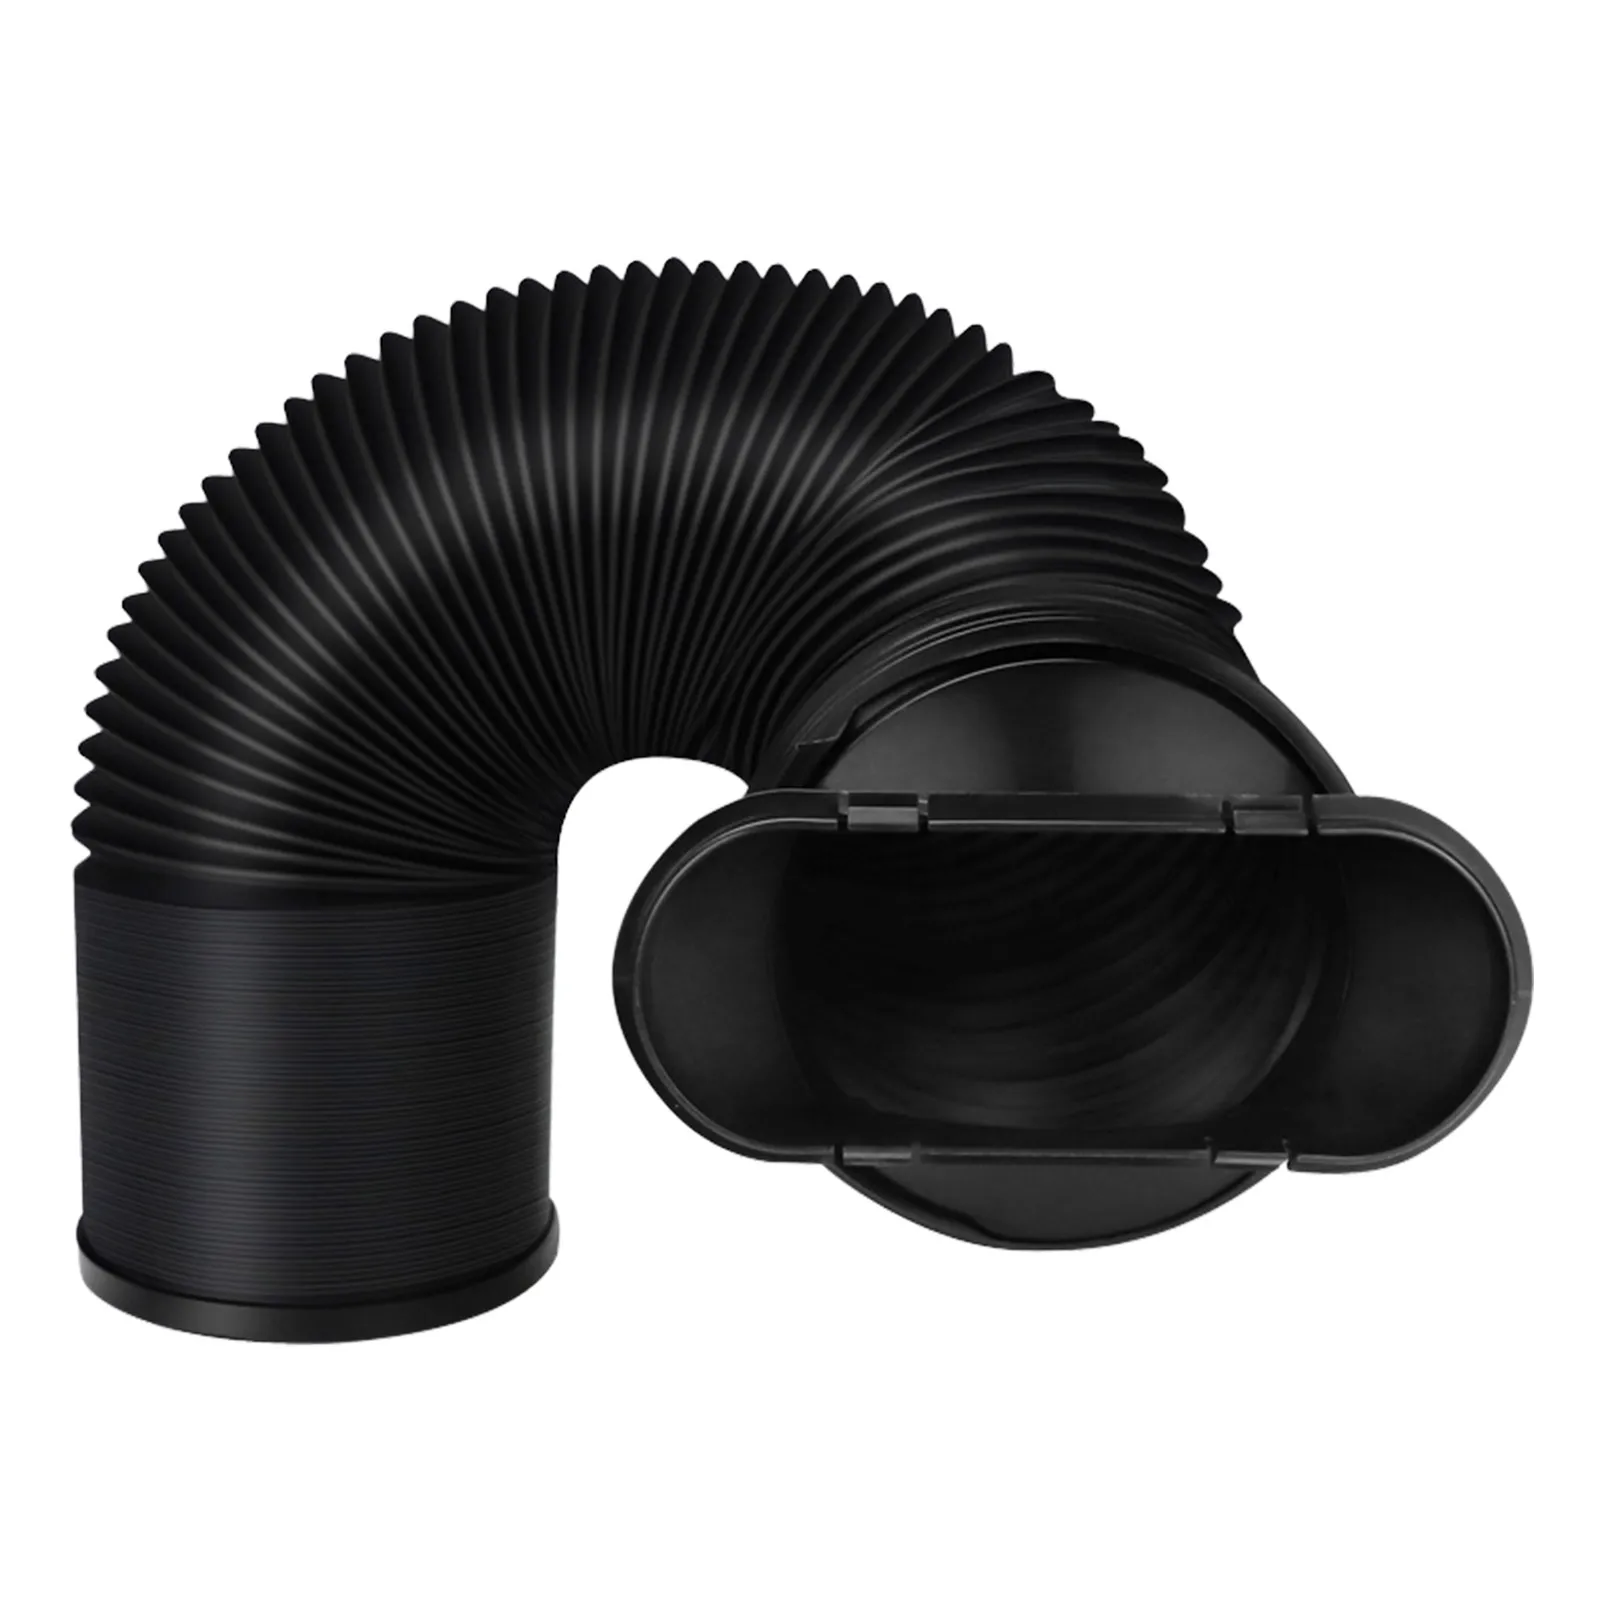 Niktule 5.9 inch Diameter AC Hose，Portable Air Conditioner Hose，Flexible Portable Exhaust Vent Compatible with Most Air Condition Anticlockwise 60 inch Length 